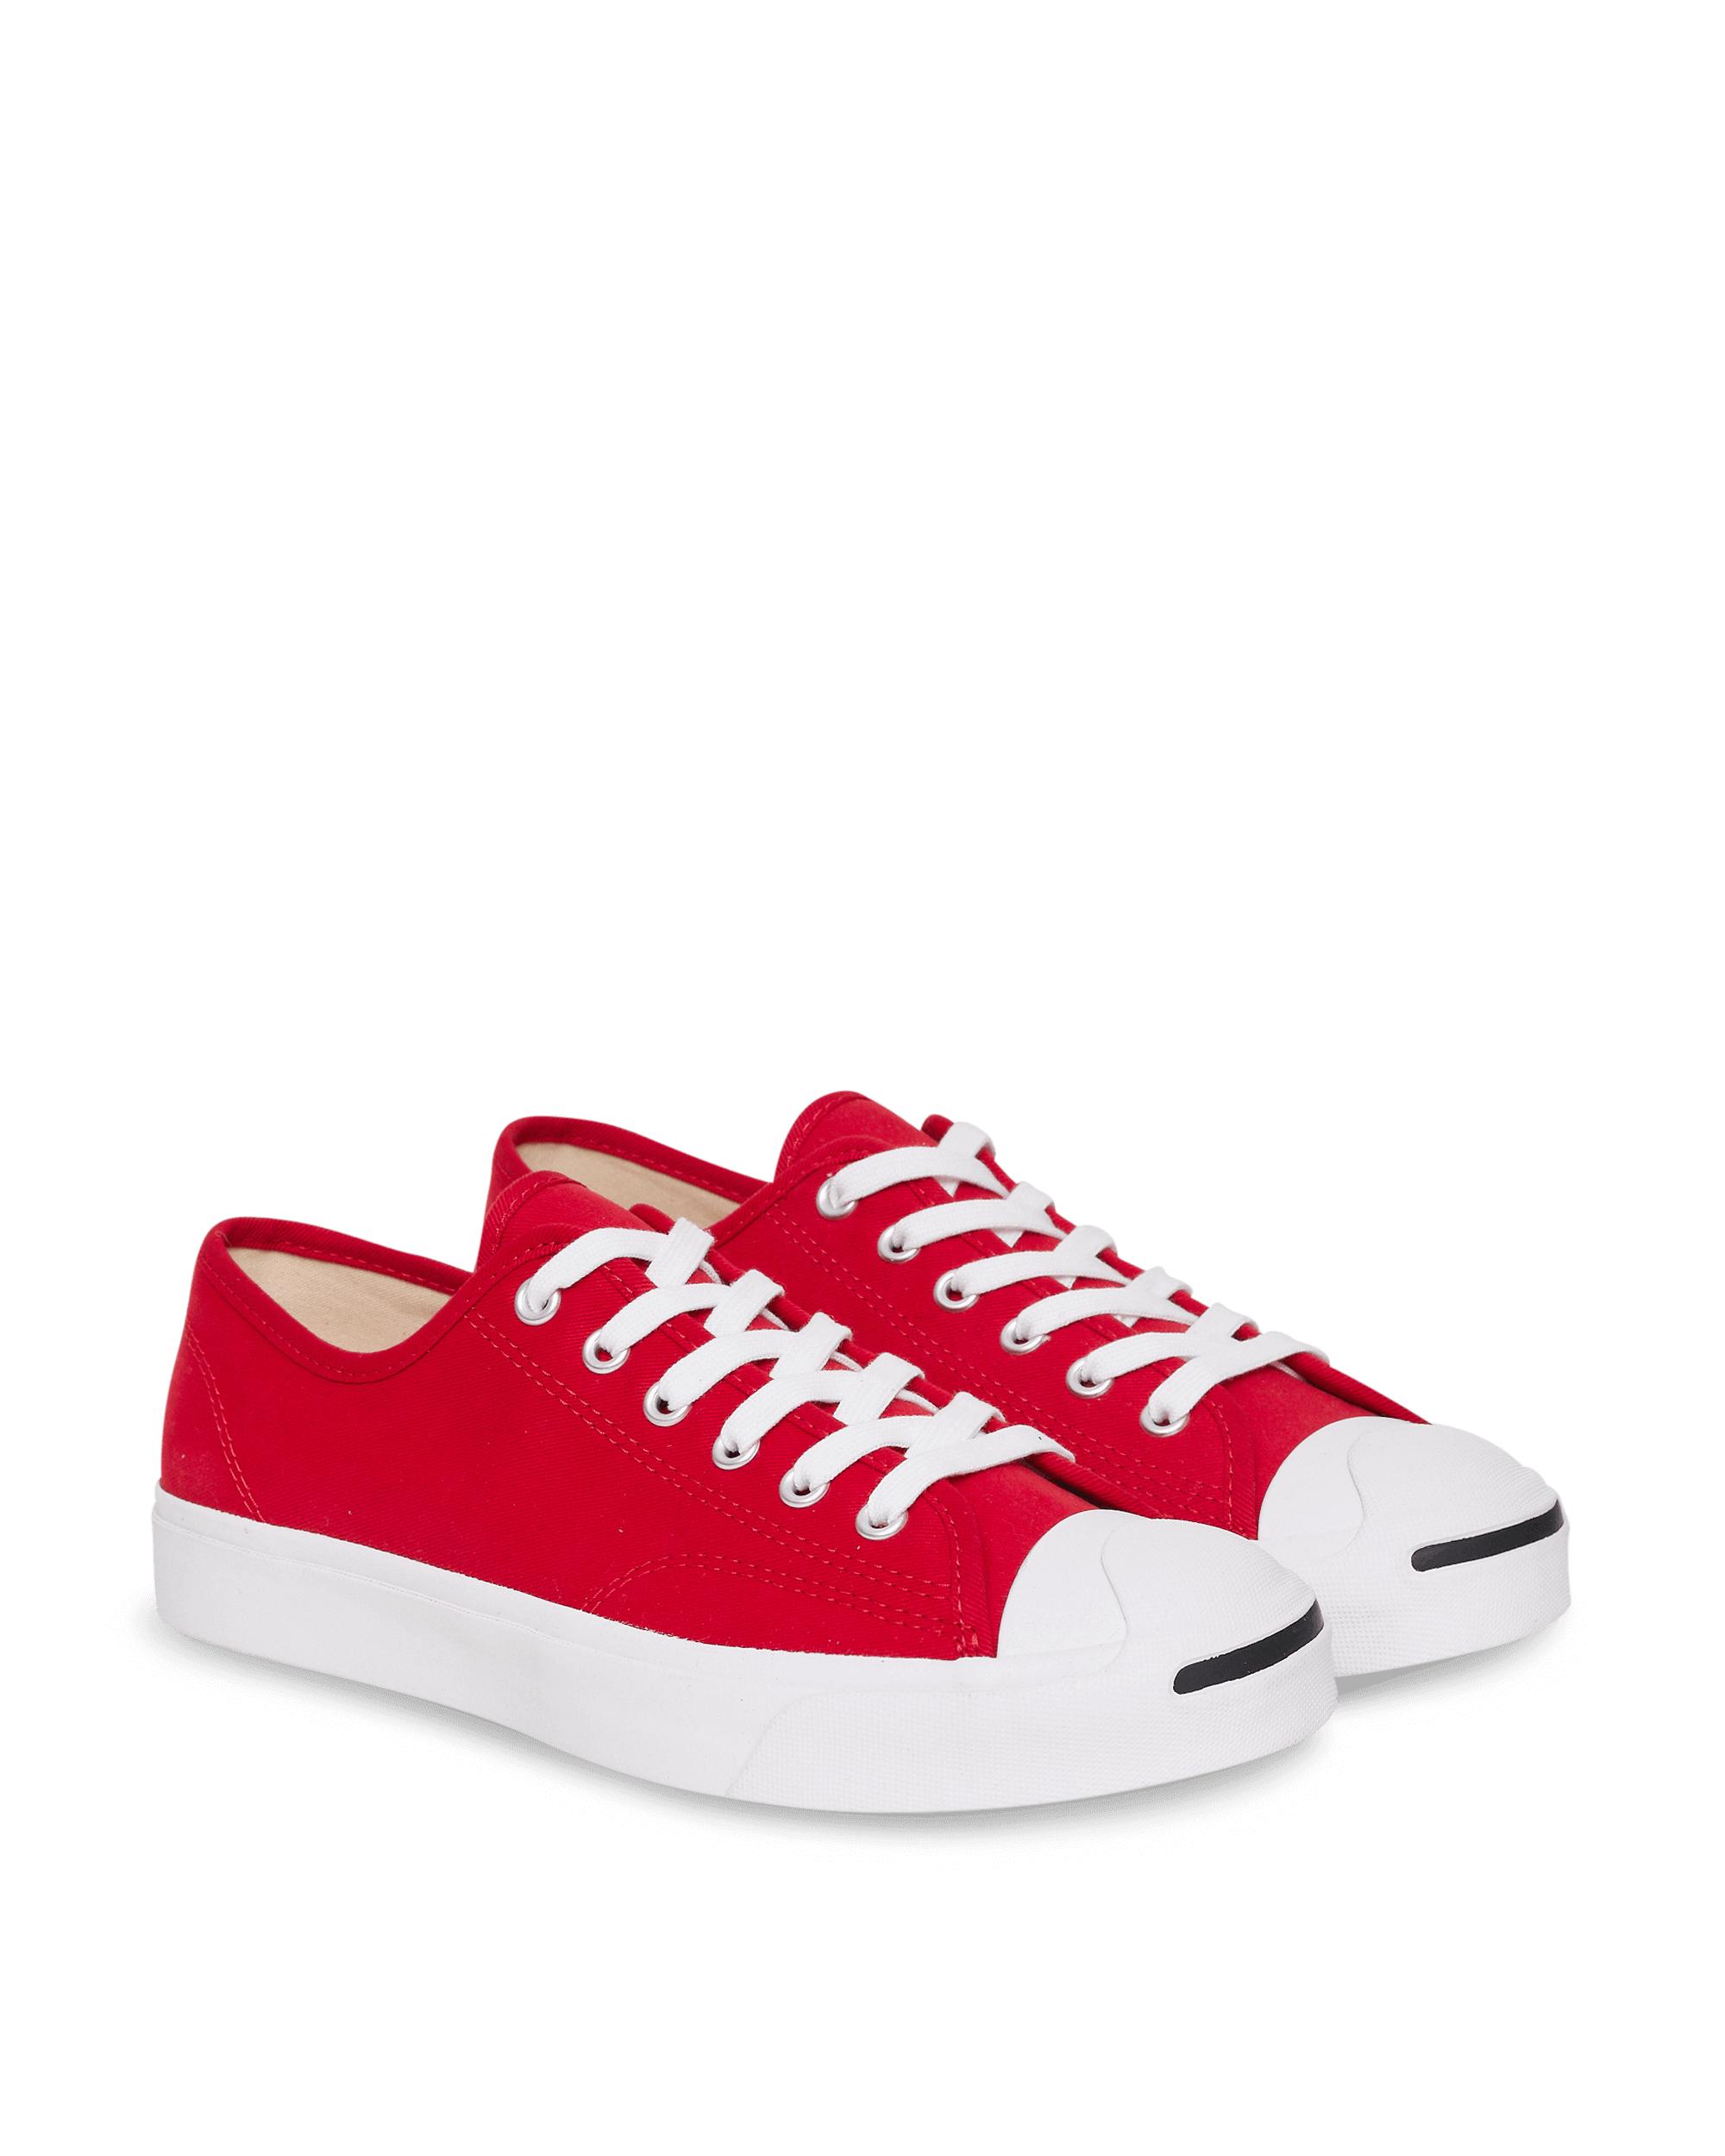 Converse Jack Purcell Sneakers in Red 